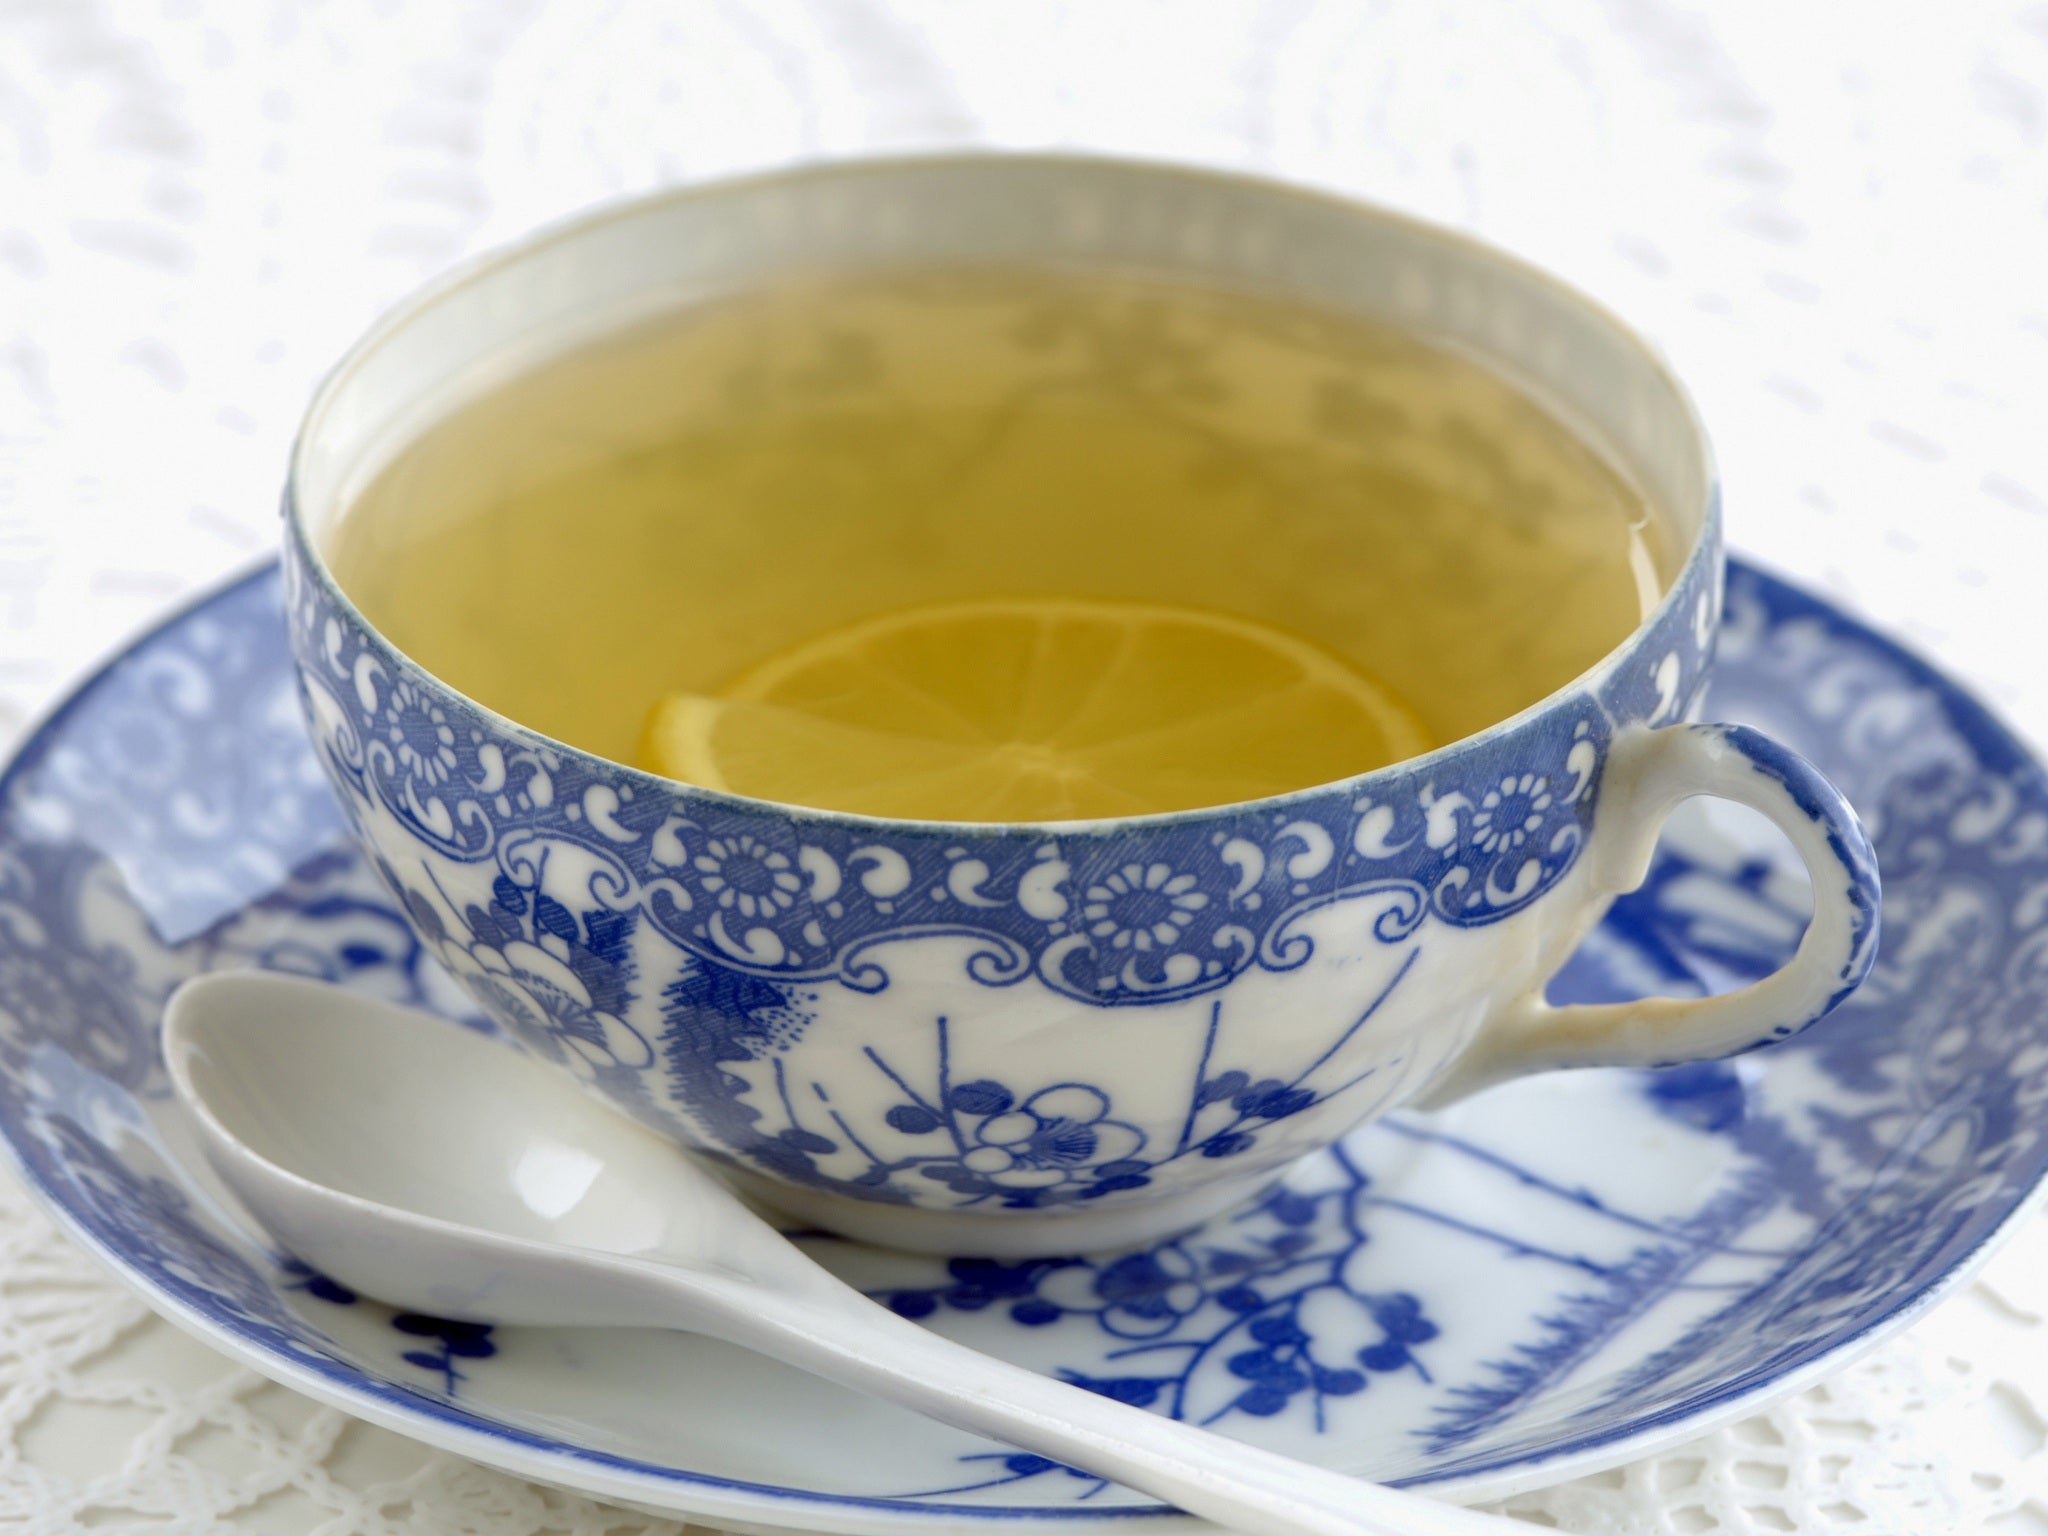 Green tea can help kill off cancerous cells, say researchers